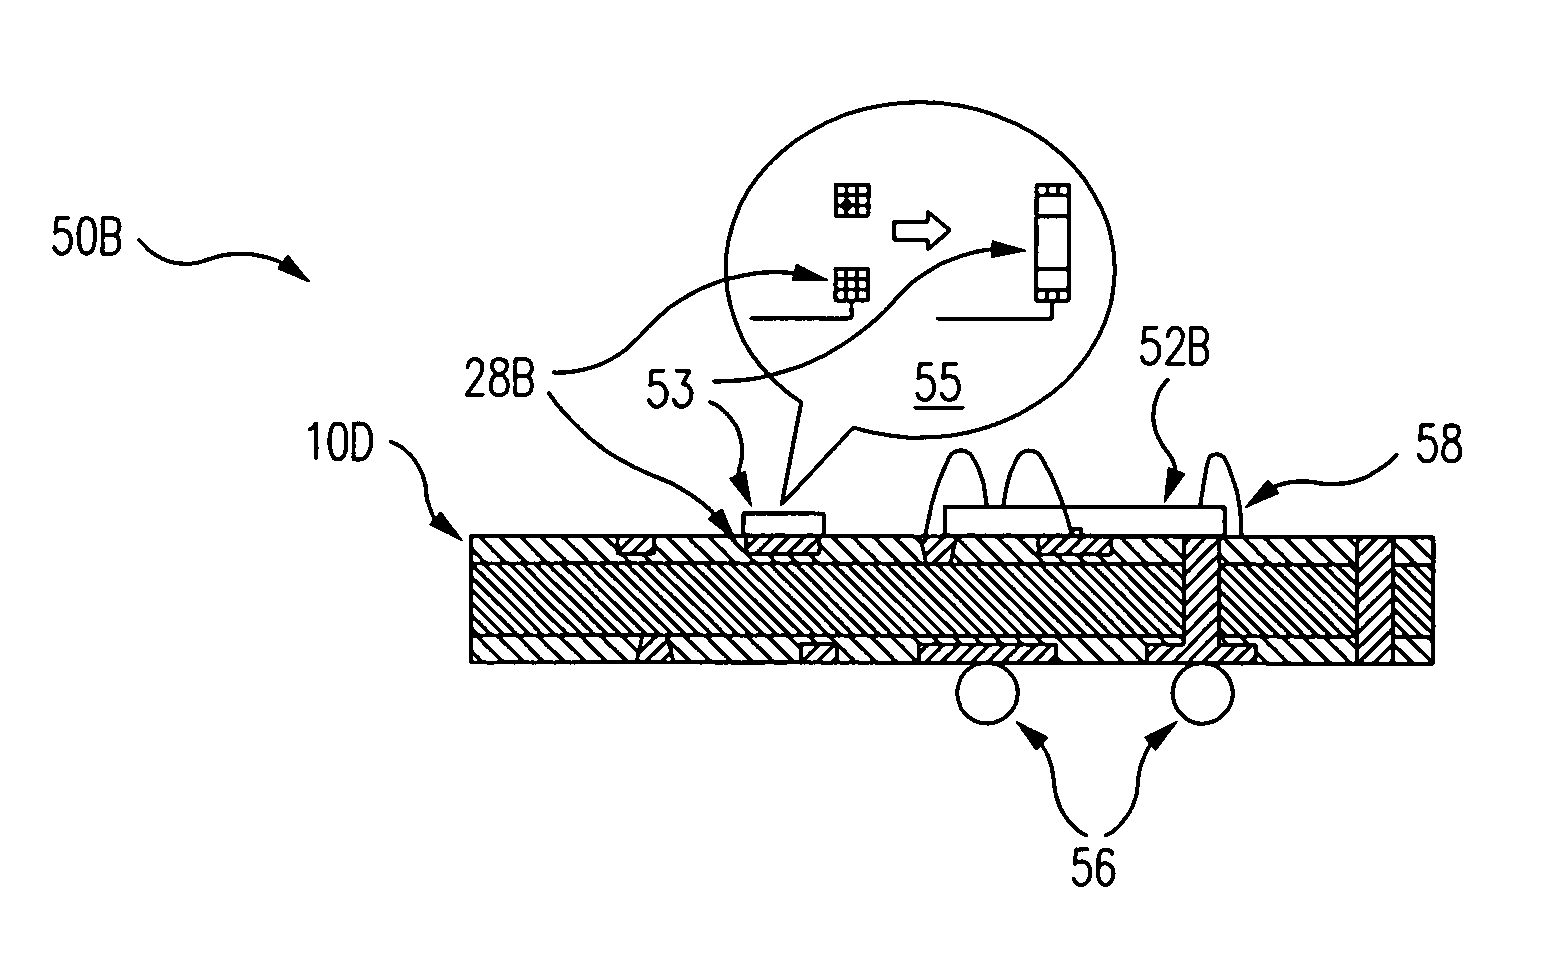 Semiconductor package substrate fabrication method